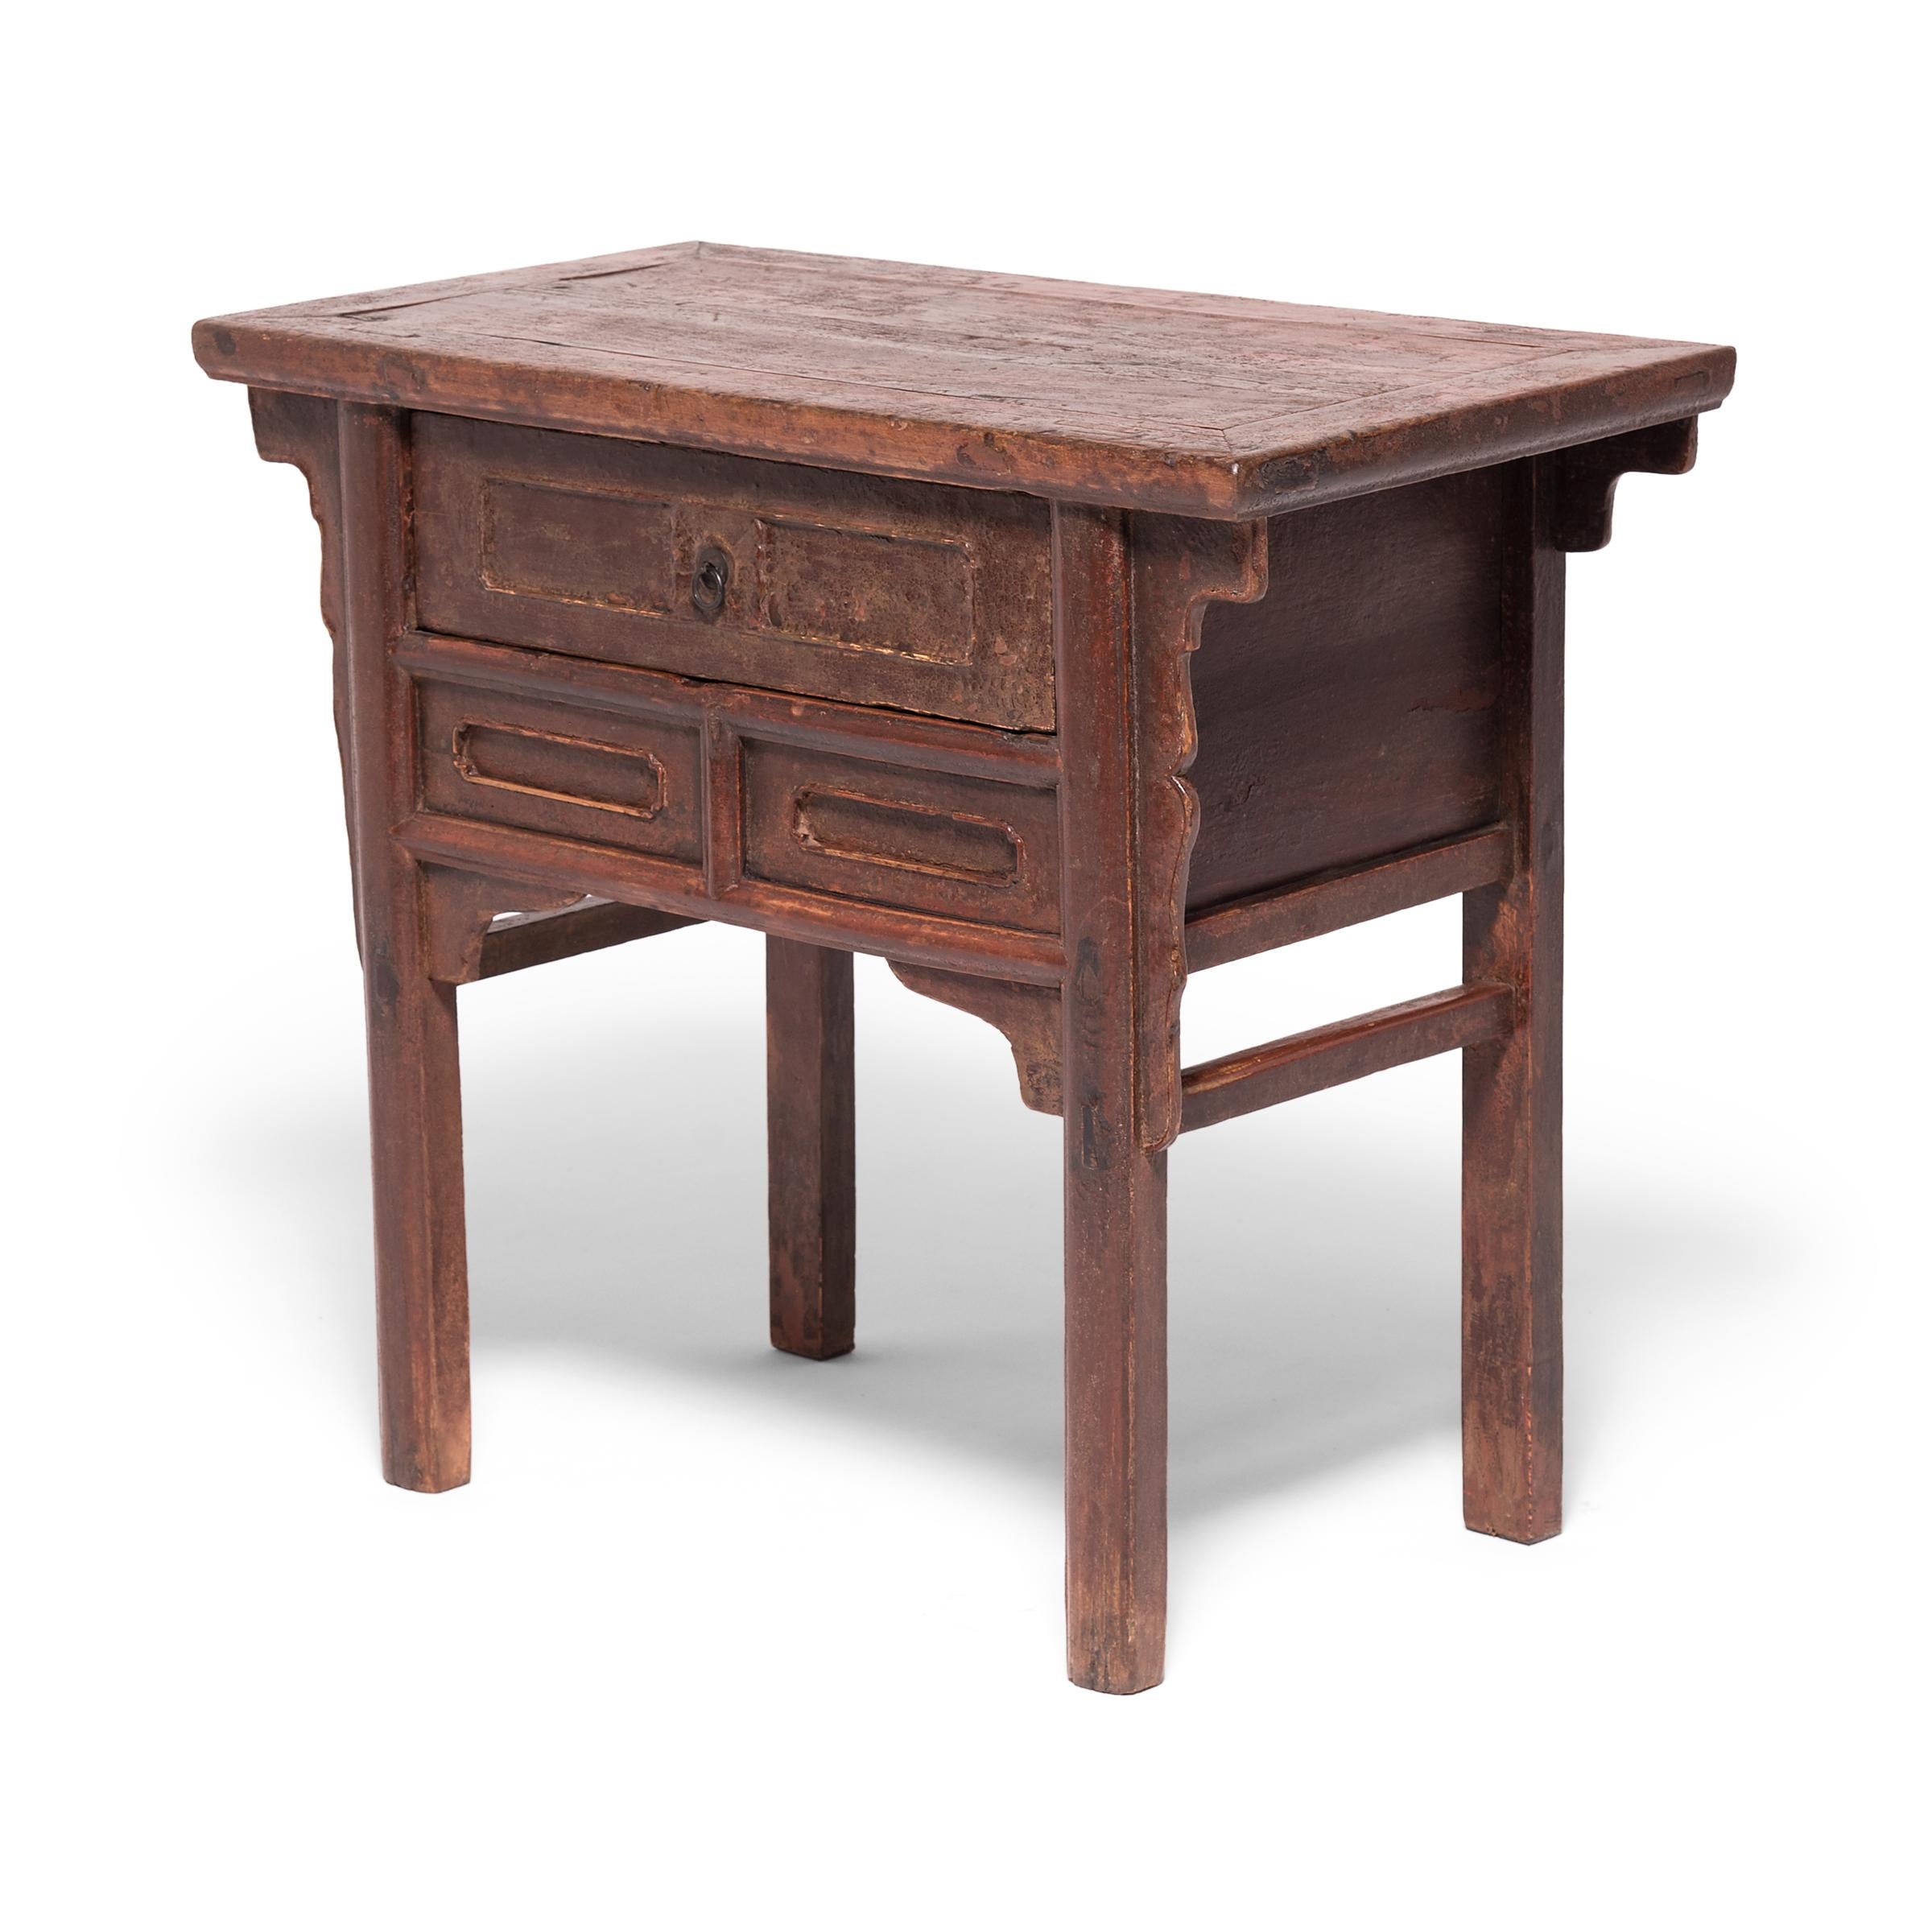 Crafted of northern elmwood in China's Shanxi province, this 19th century provincial table chest mixes simple Qing-dynasty forms with subtle ornamentation. Featuring a floating panel top and a single drawer with brass pulls, the table has a rustic